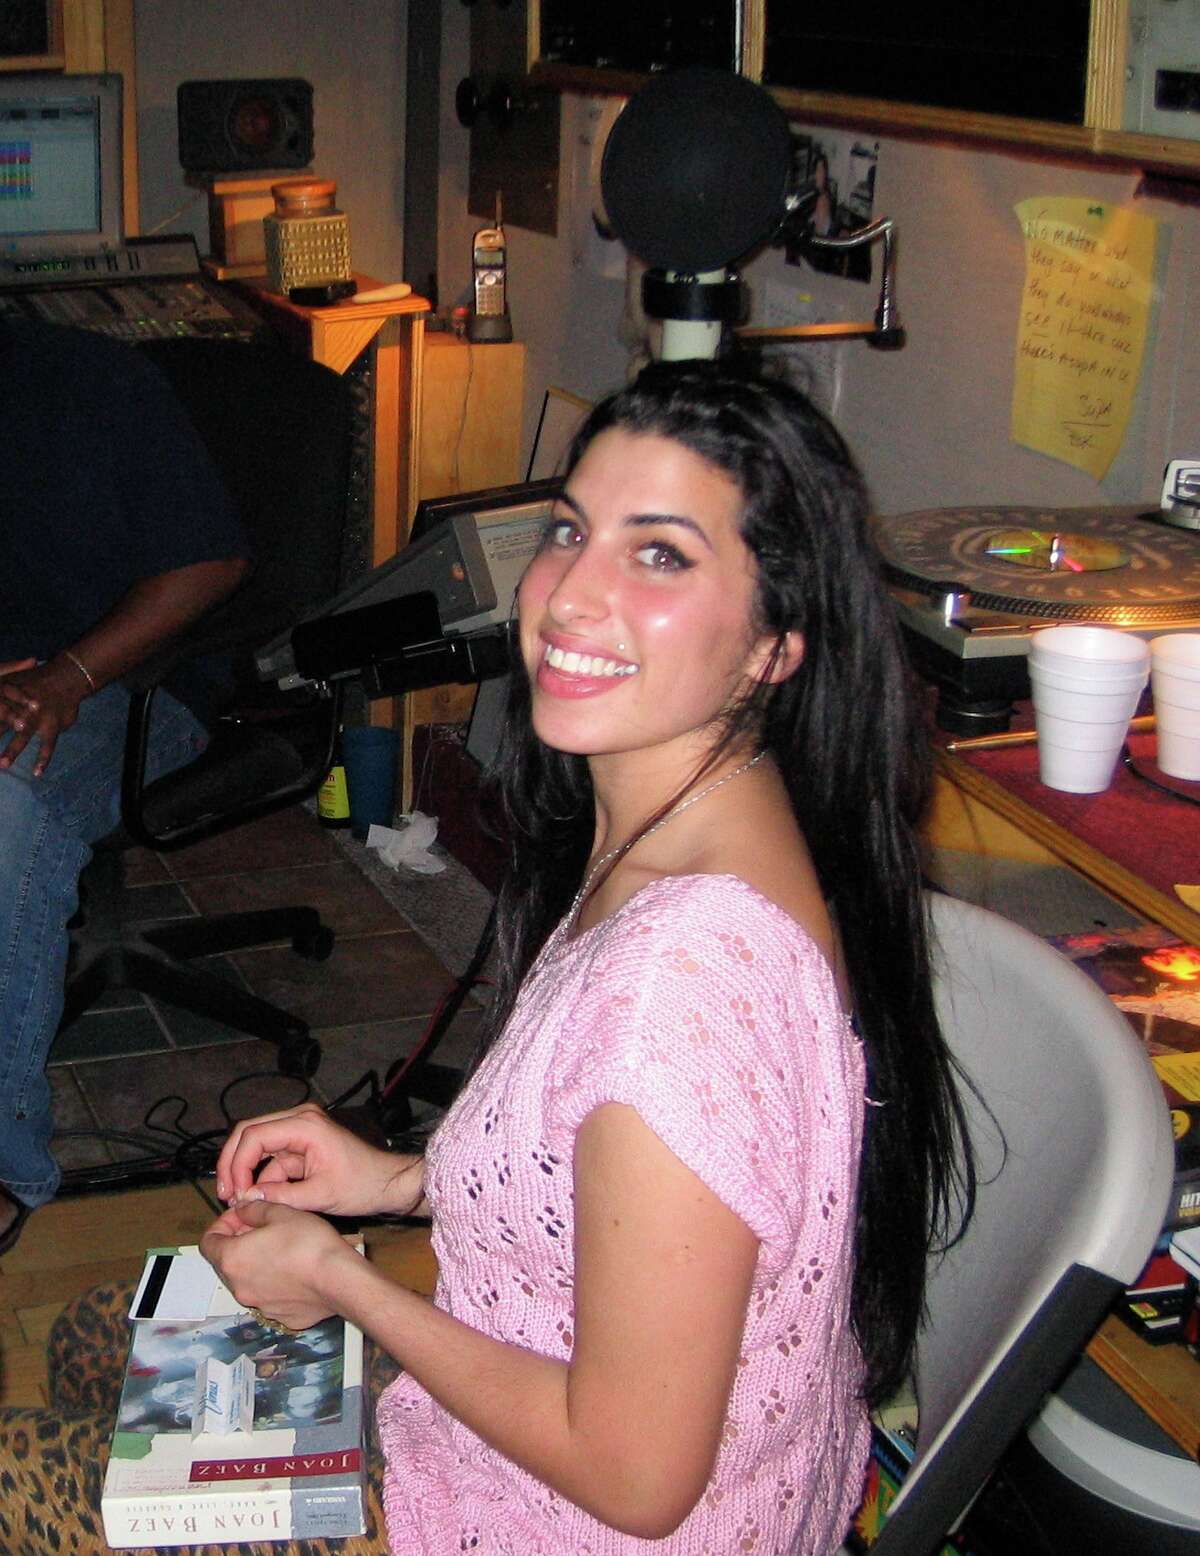 Singer Amy Winehouse in a scene from the documentary "Amy."